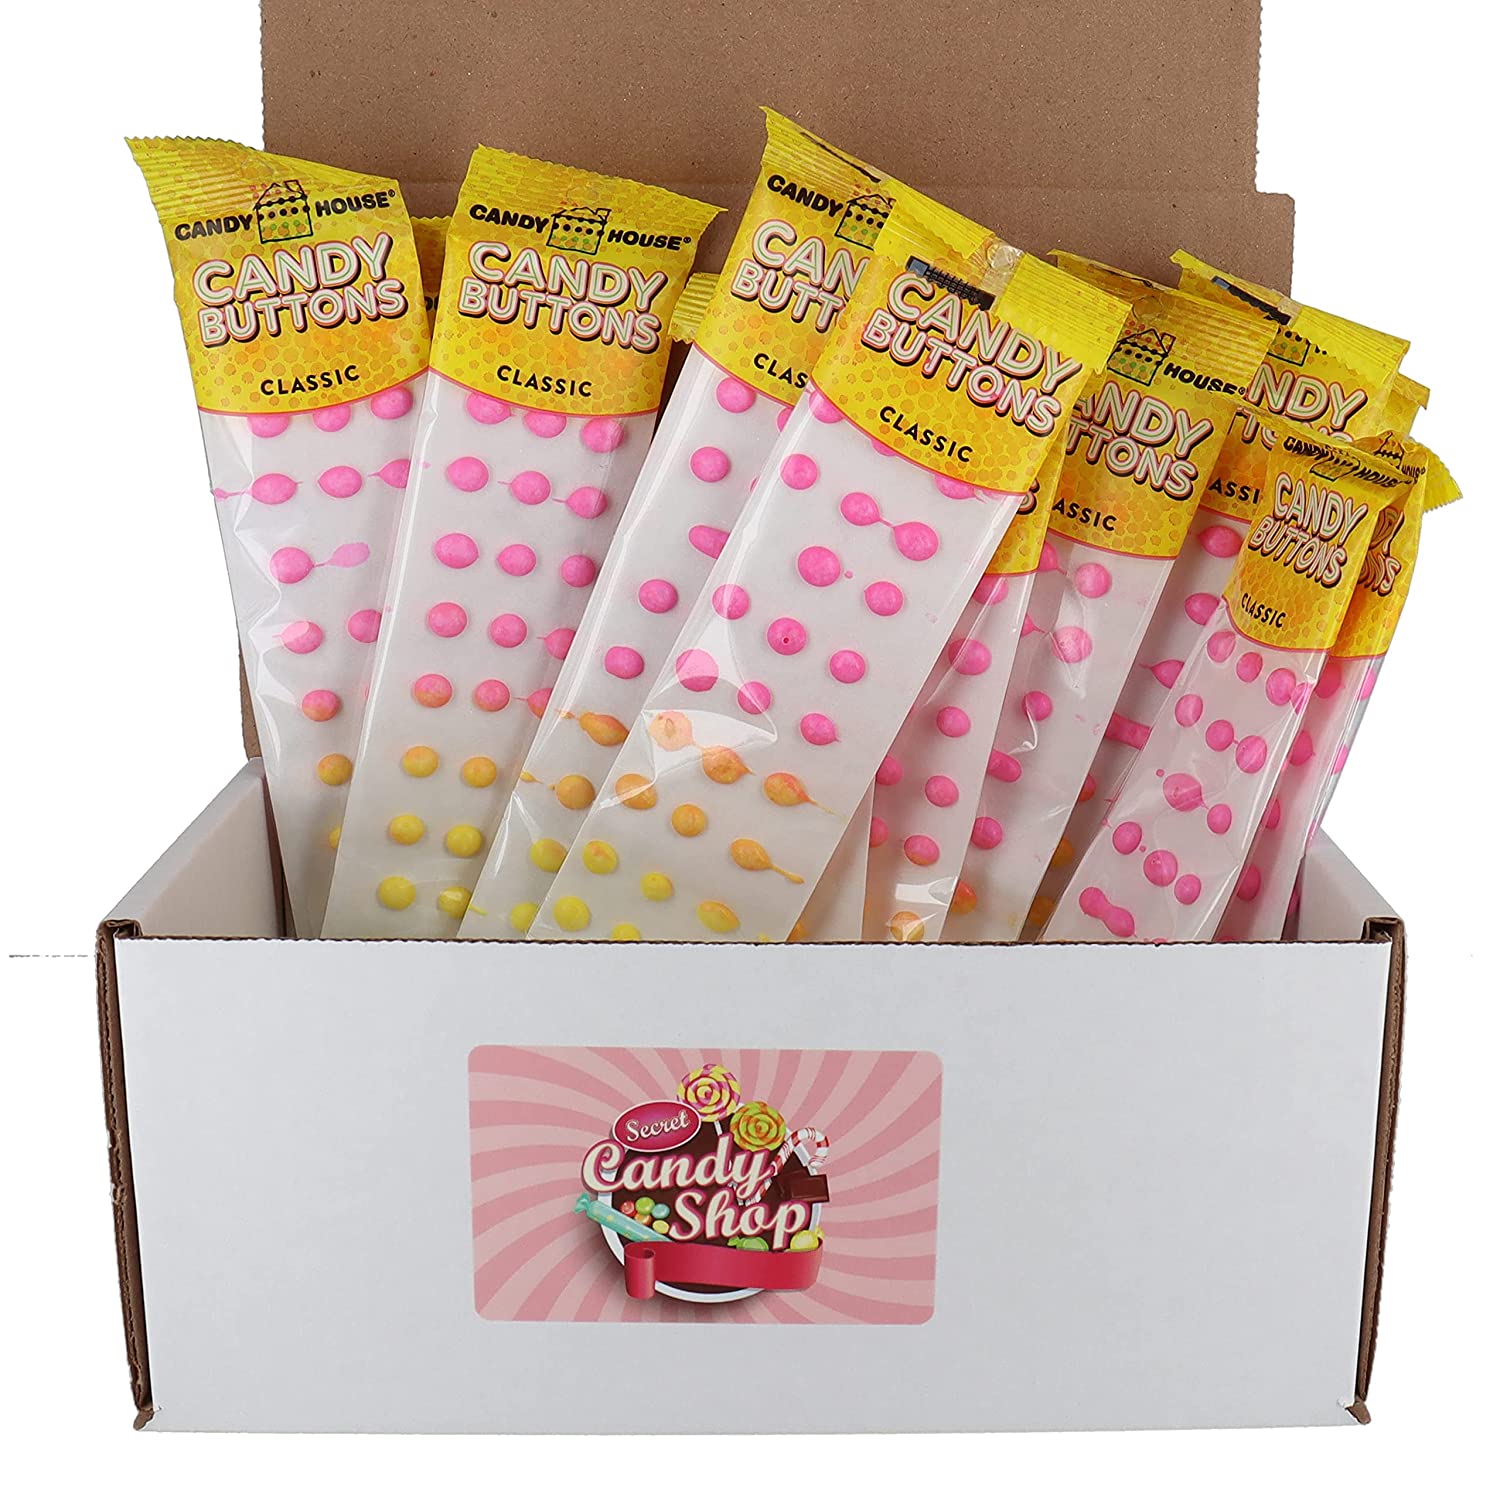 Secret Candy Shop Candy House Candy Buttons Candy Drops (Individually Wrapped) (Original, Pack of 12 (24 Strips))